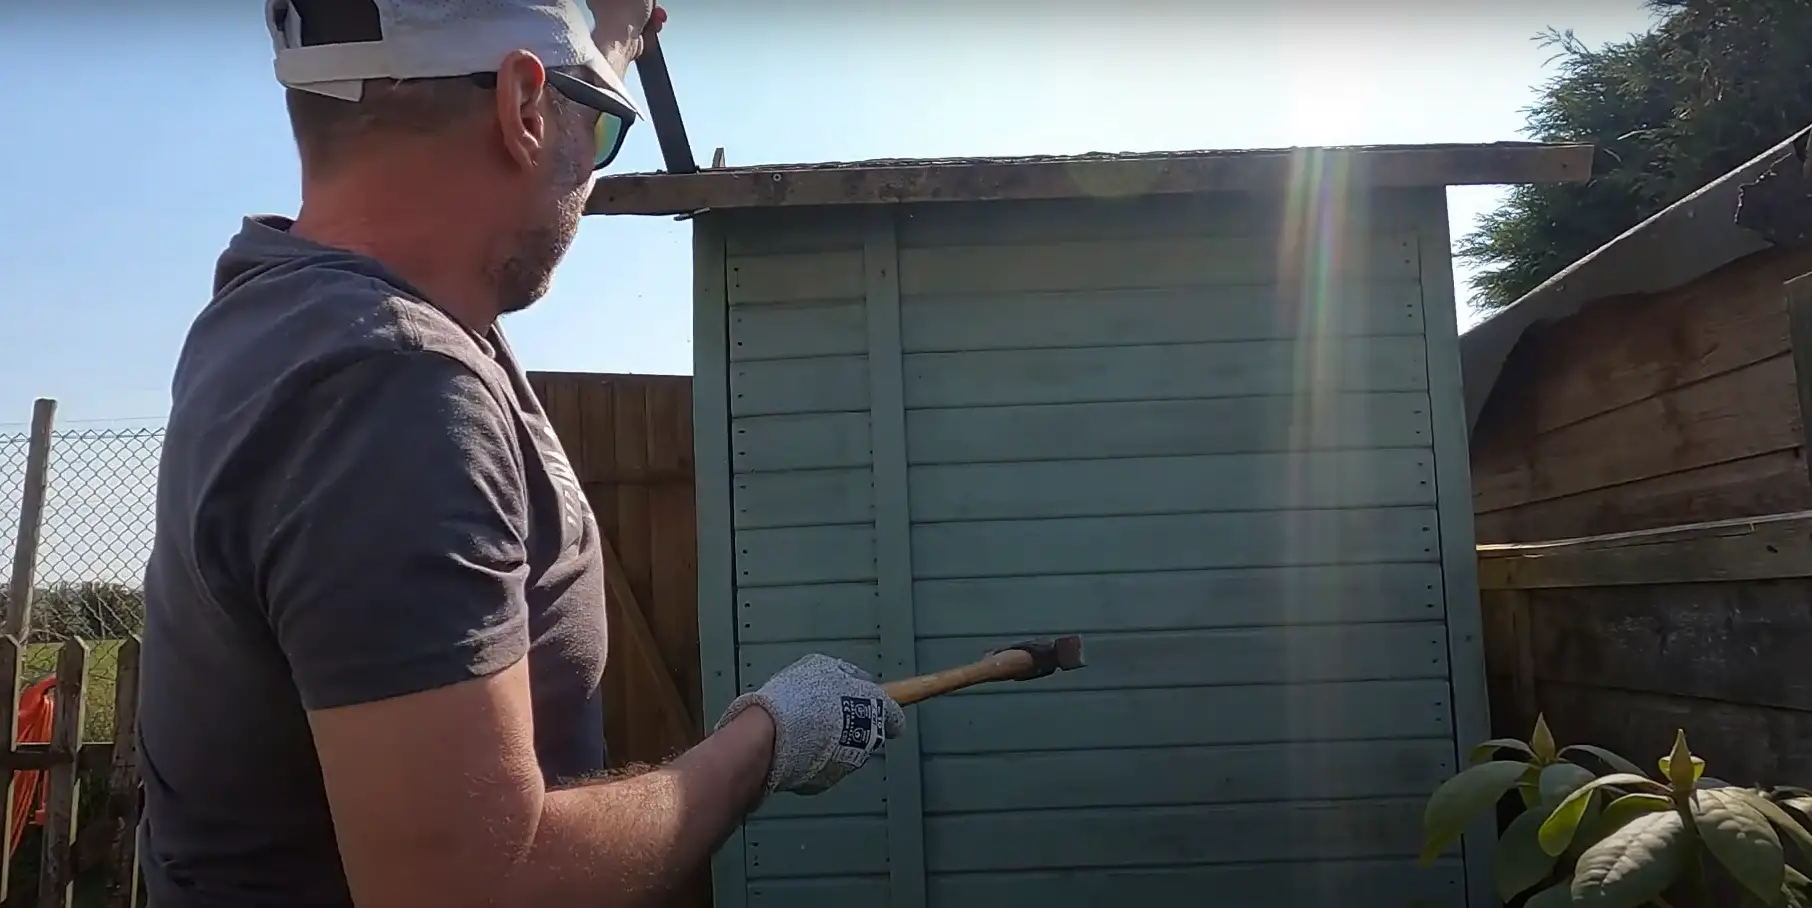 Reasons You May Want To Replace A Shed Roof